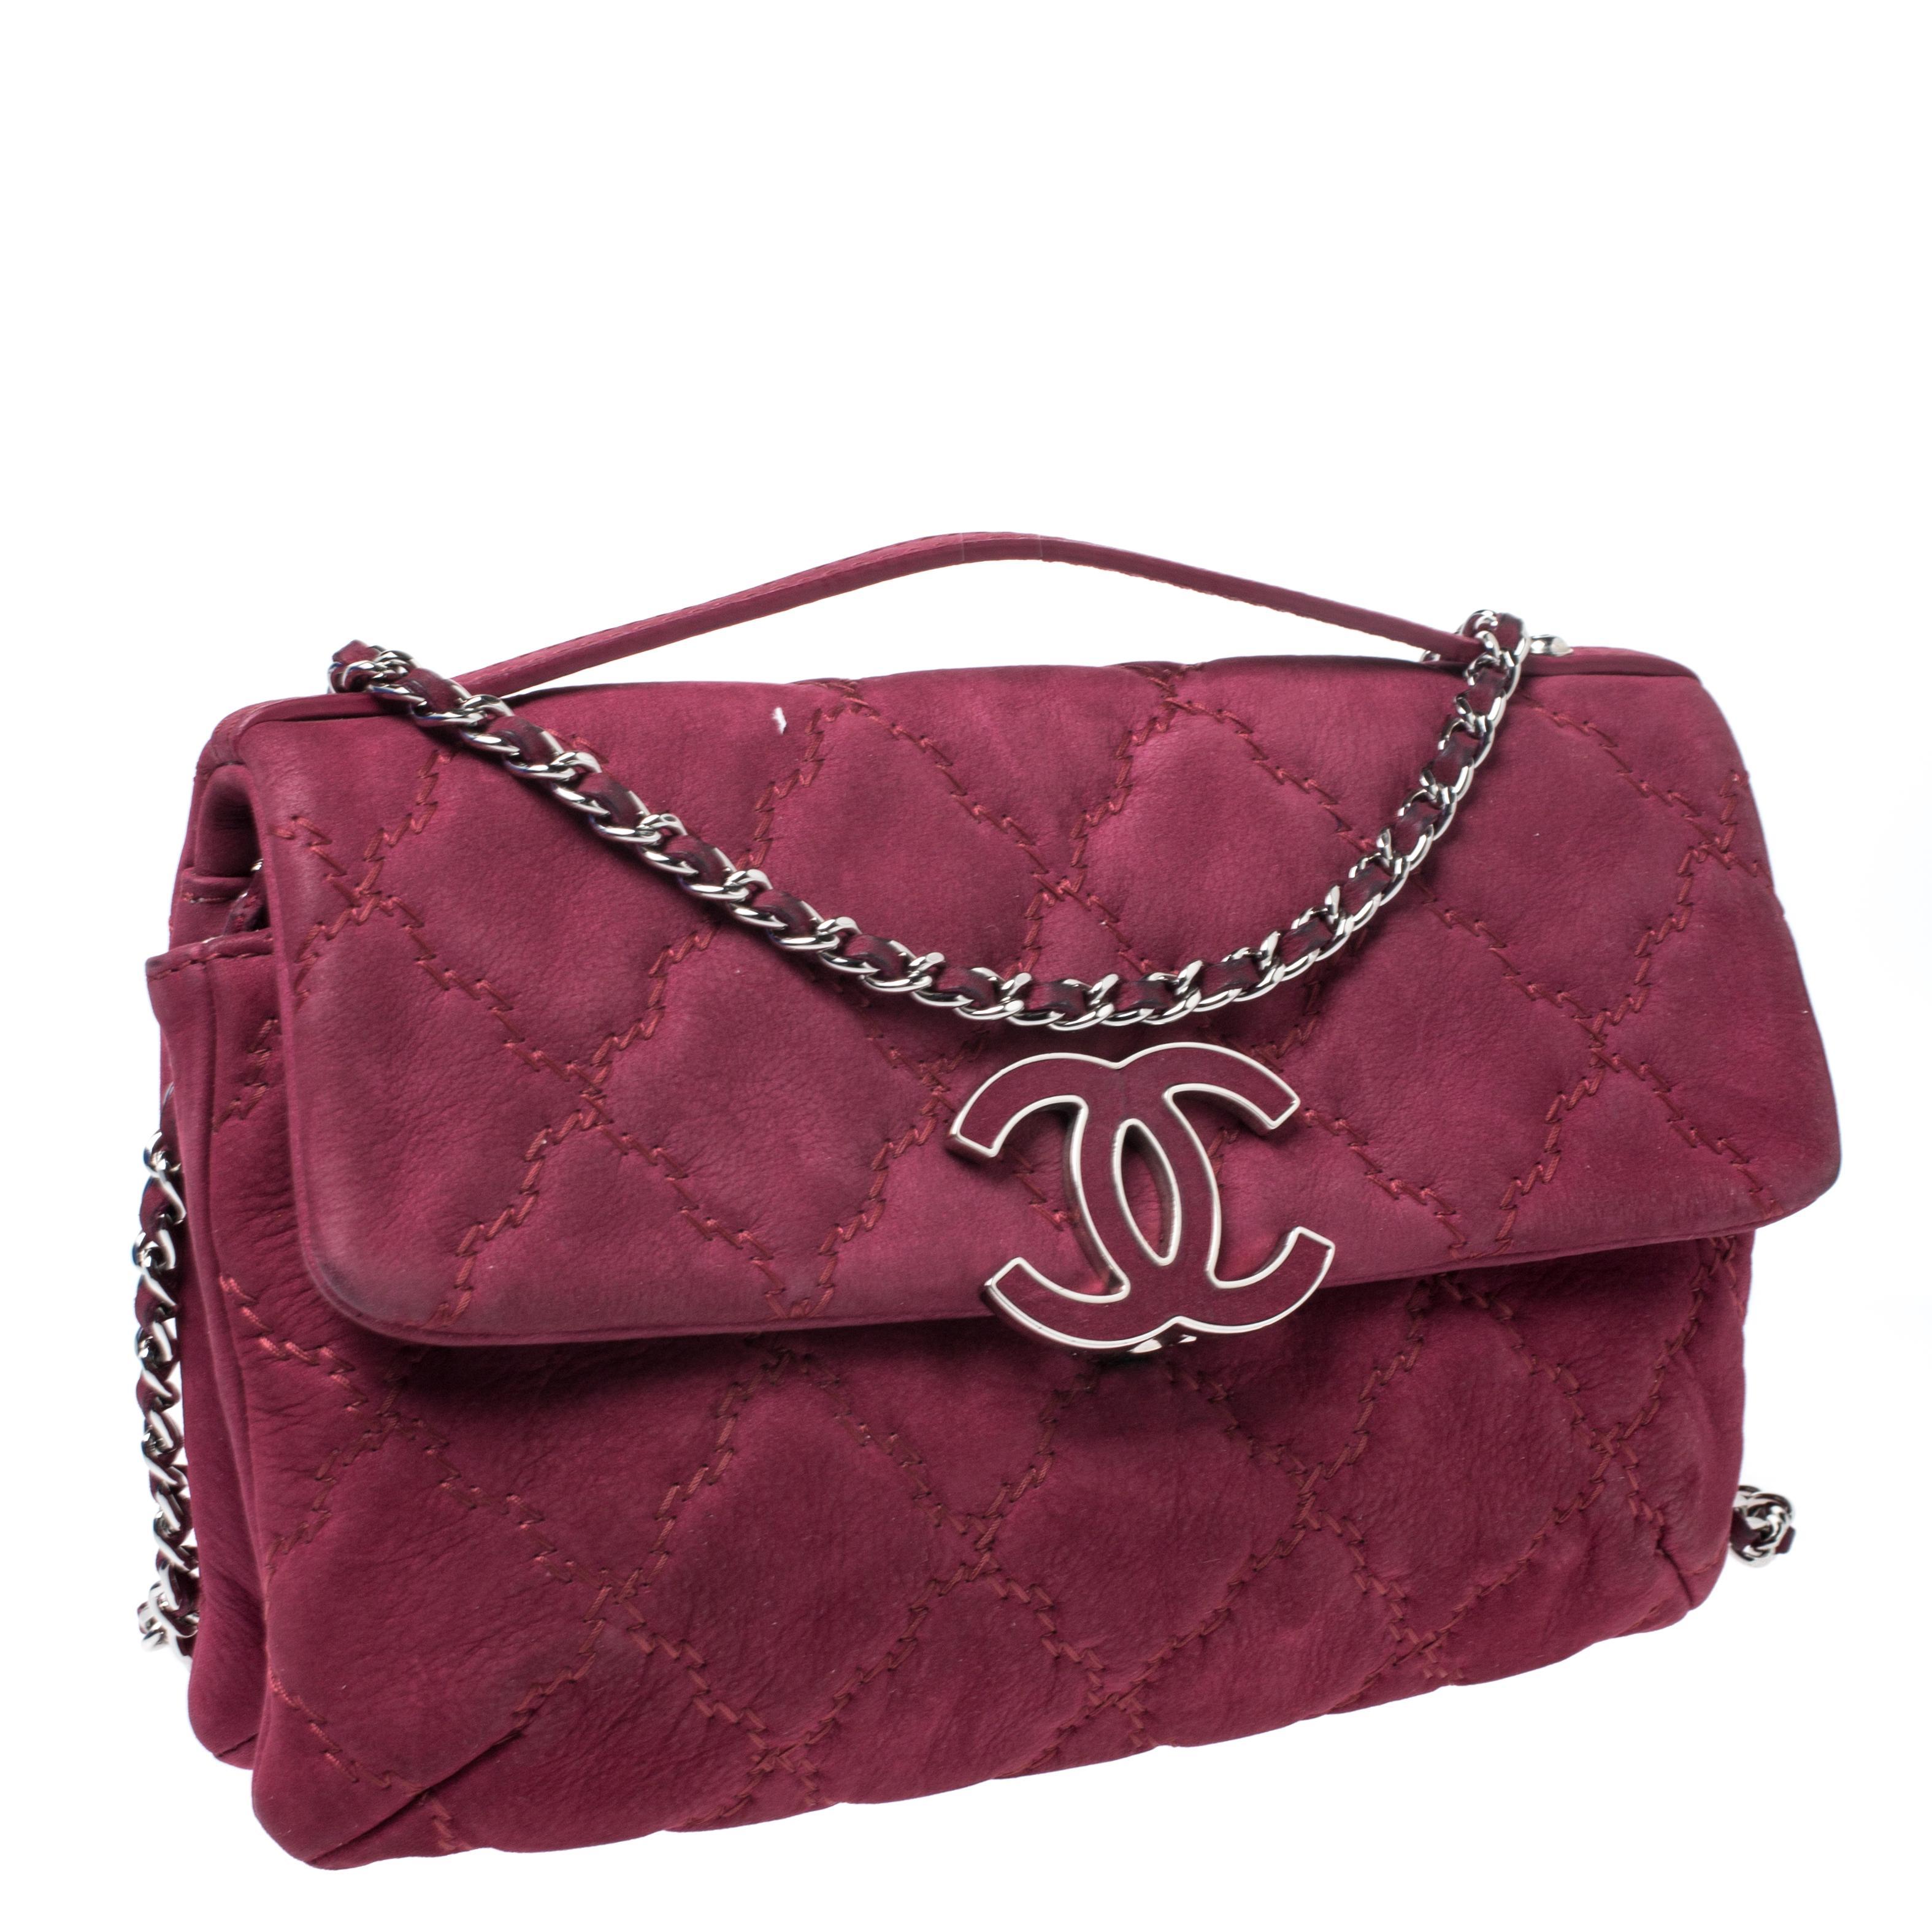 Chanel Burgundy Stitch Quilted Leather CC Clasp Flap Bag In Good Condition In Dubai, Al Qouz 2